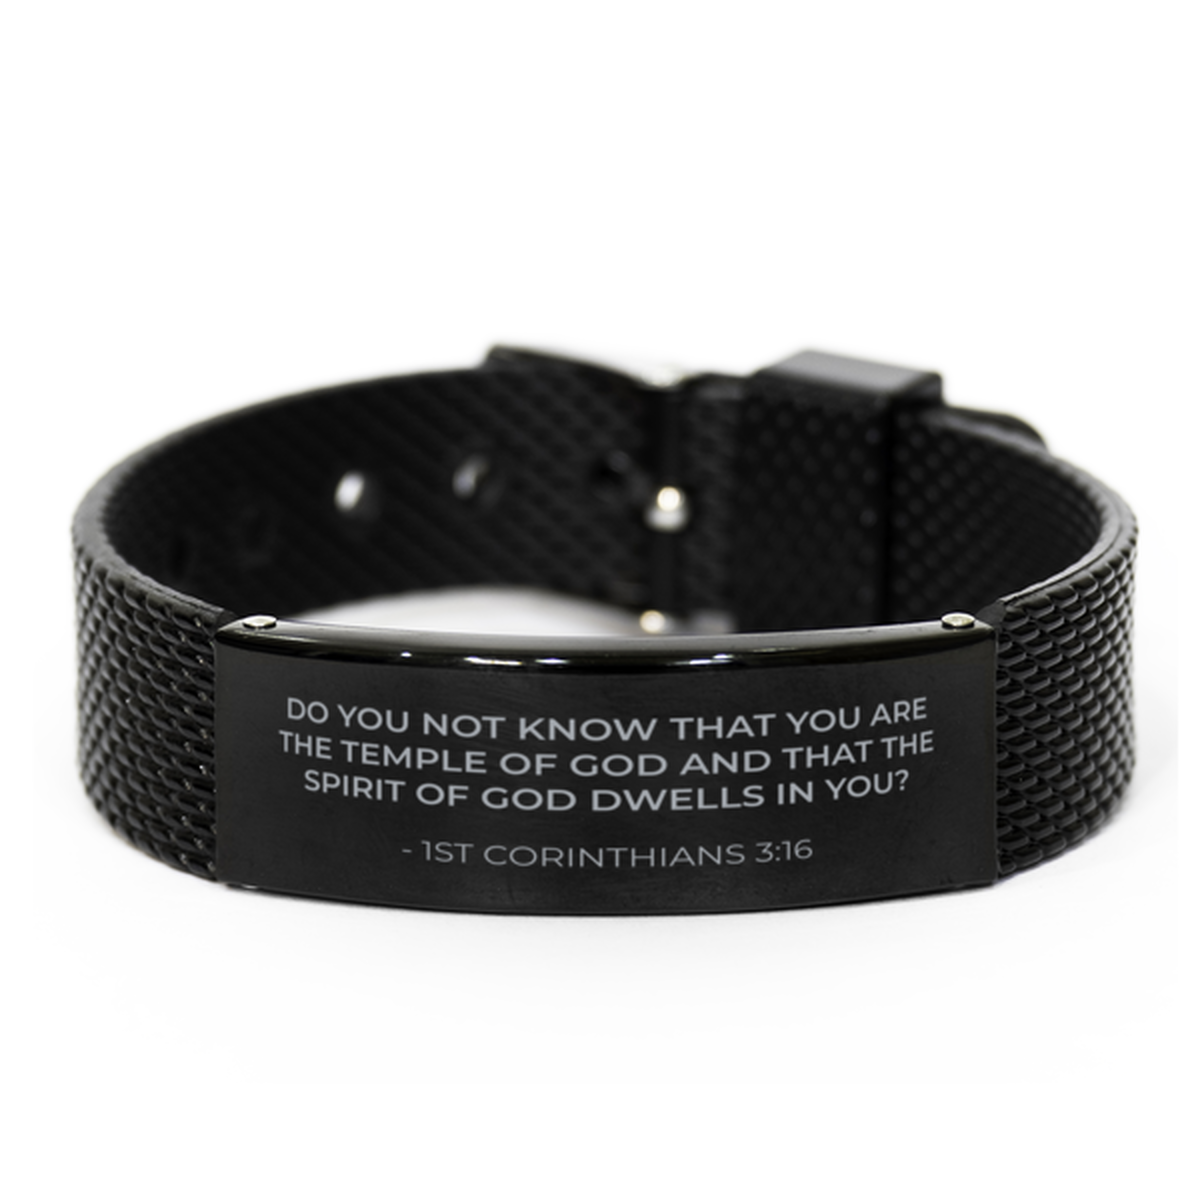 Christian Black Bracelet,, 1St Corinthians 3:16 Do You Not Know That You Are The Temple Of God, Motivational Bible Verse Gifts For Men Women